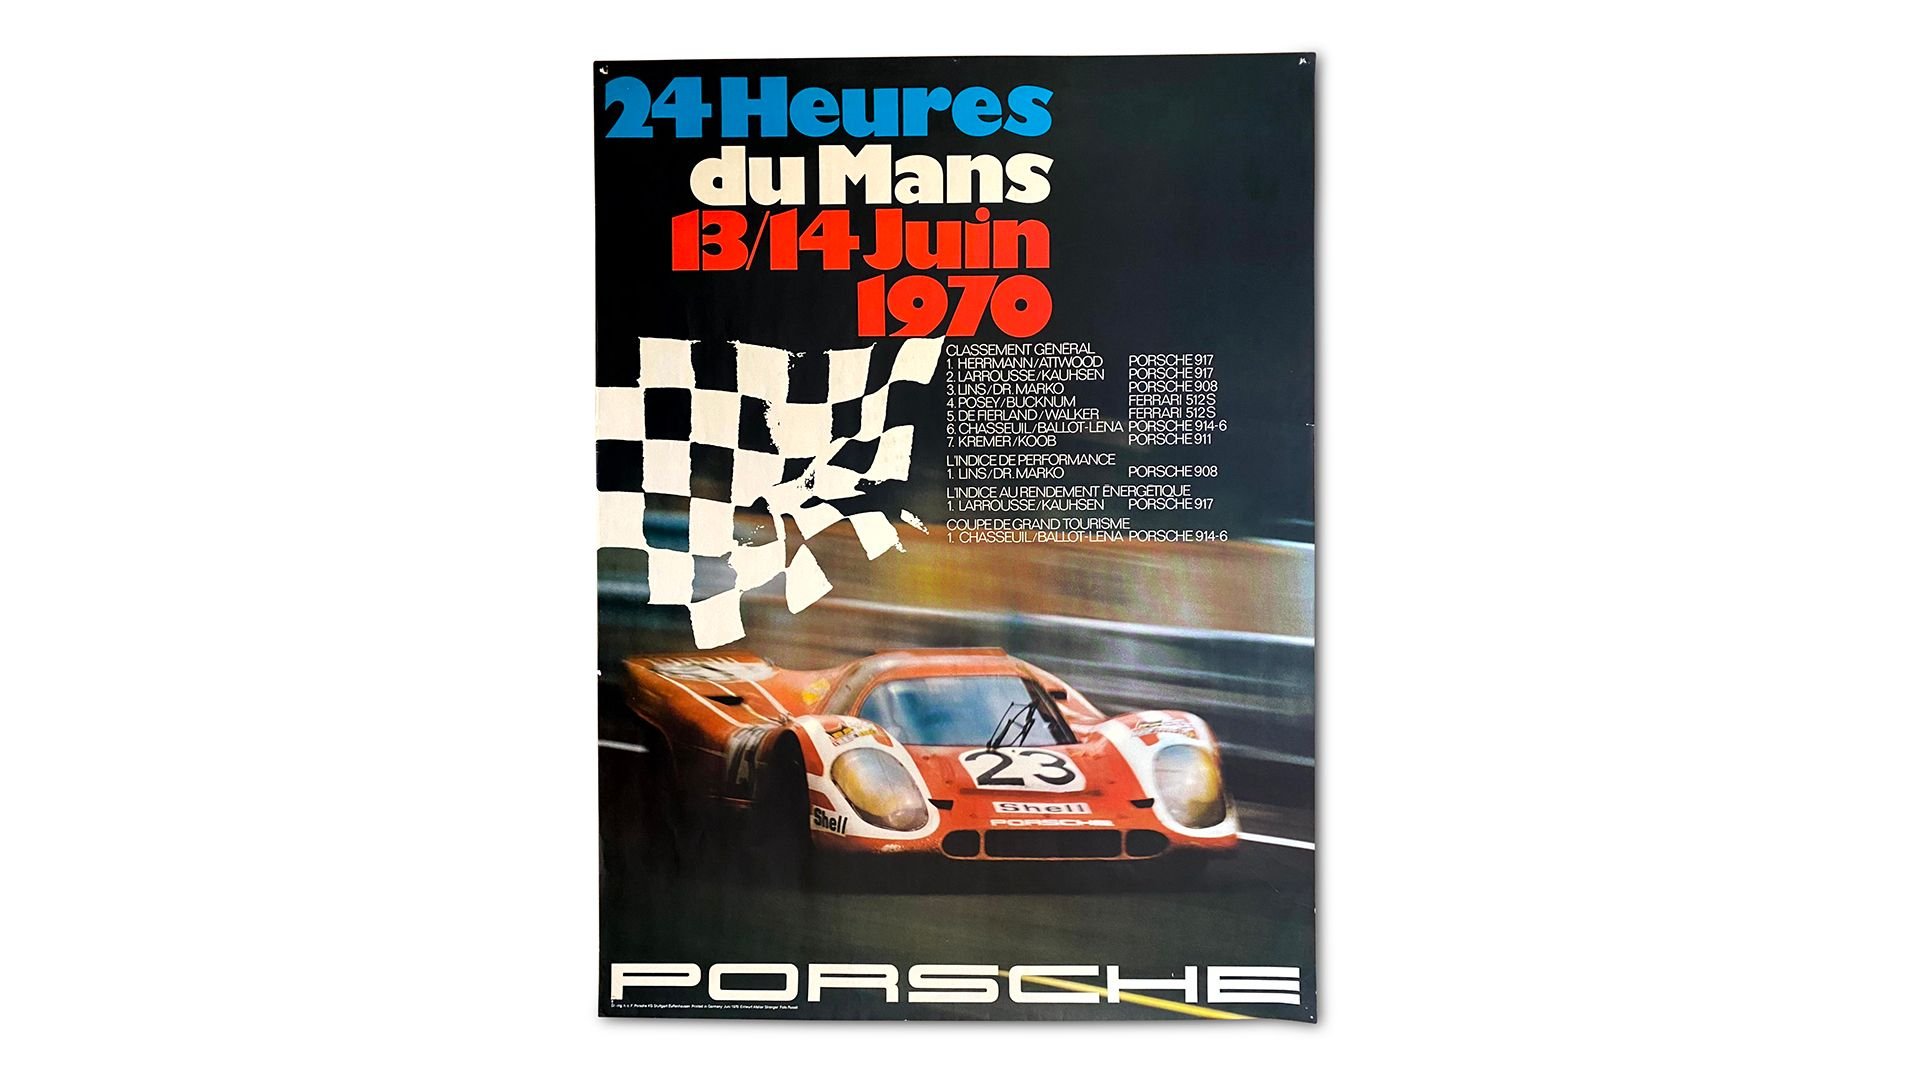 Broad Arrow Auctions | Group of 13 Porsche Sports Racing Prototype 917 Factory Racing Posters 1969-1971